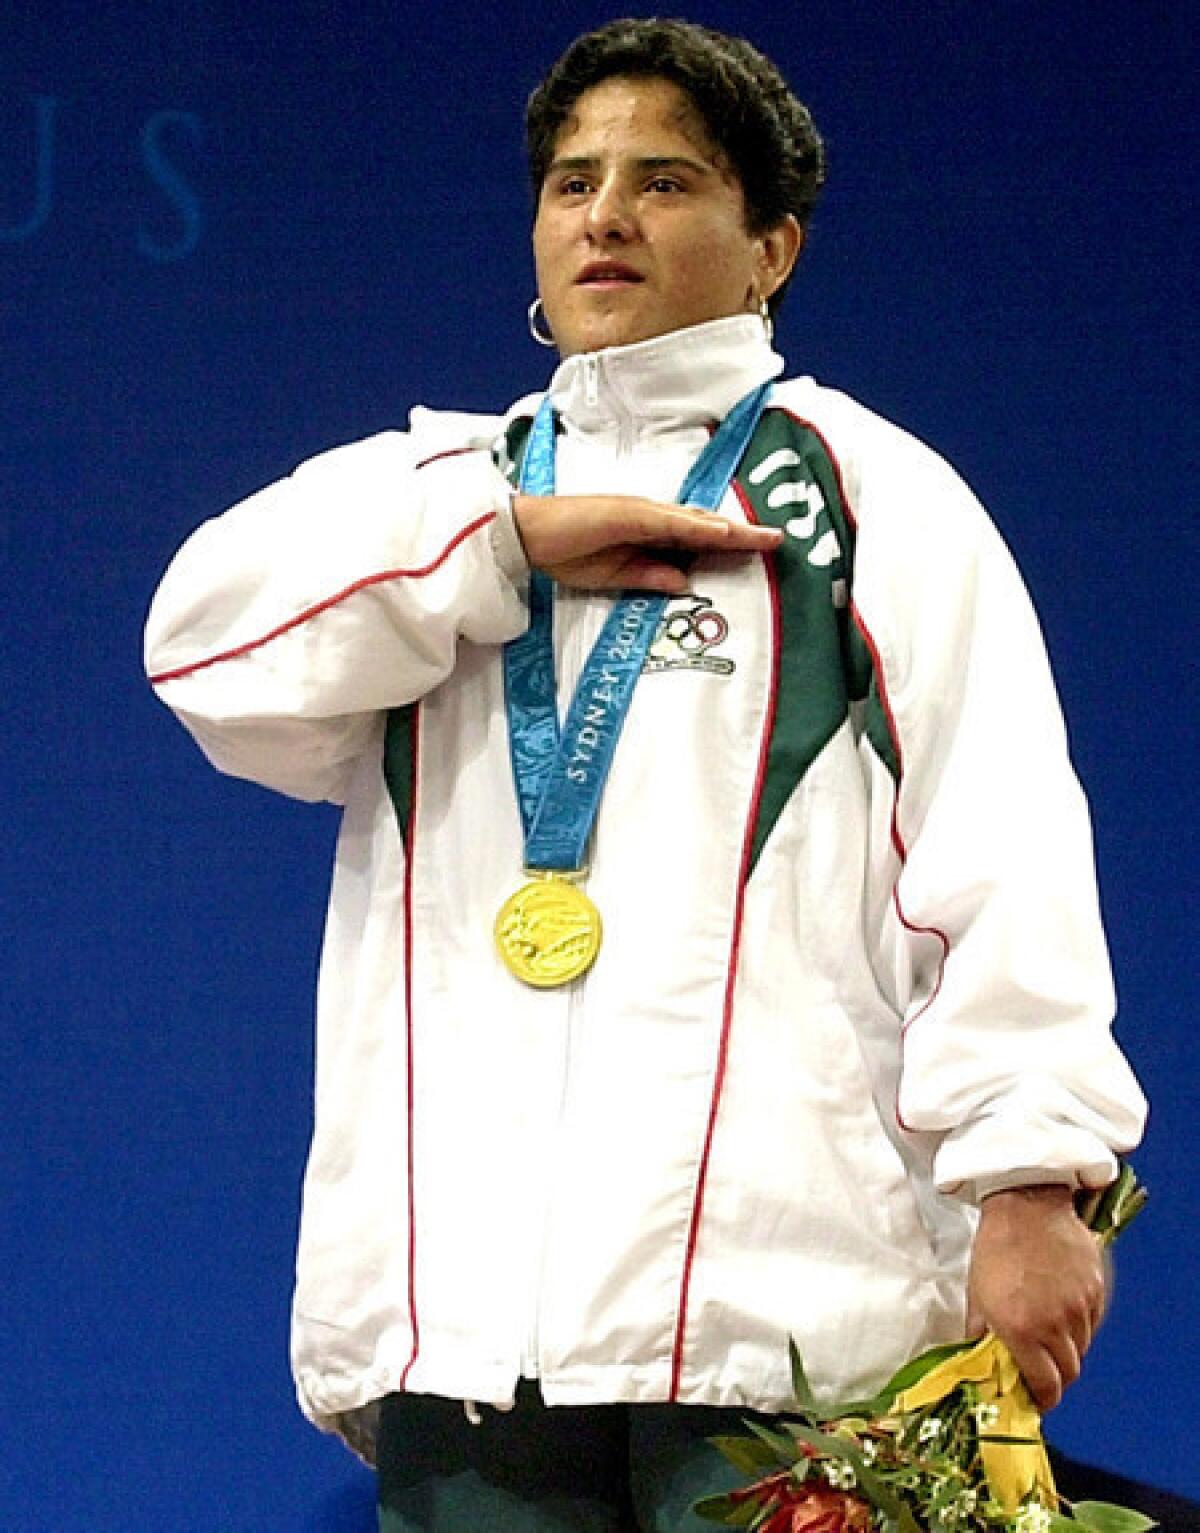 Weightlifter Soraya Jimenez salutes from the victory stand as the national anthem of Mexico plays after she received her gold medal at the 2000 Sydney Olympics.